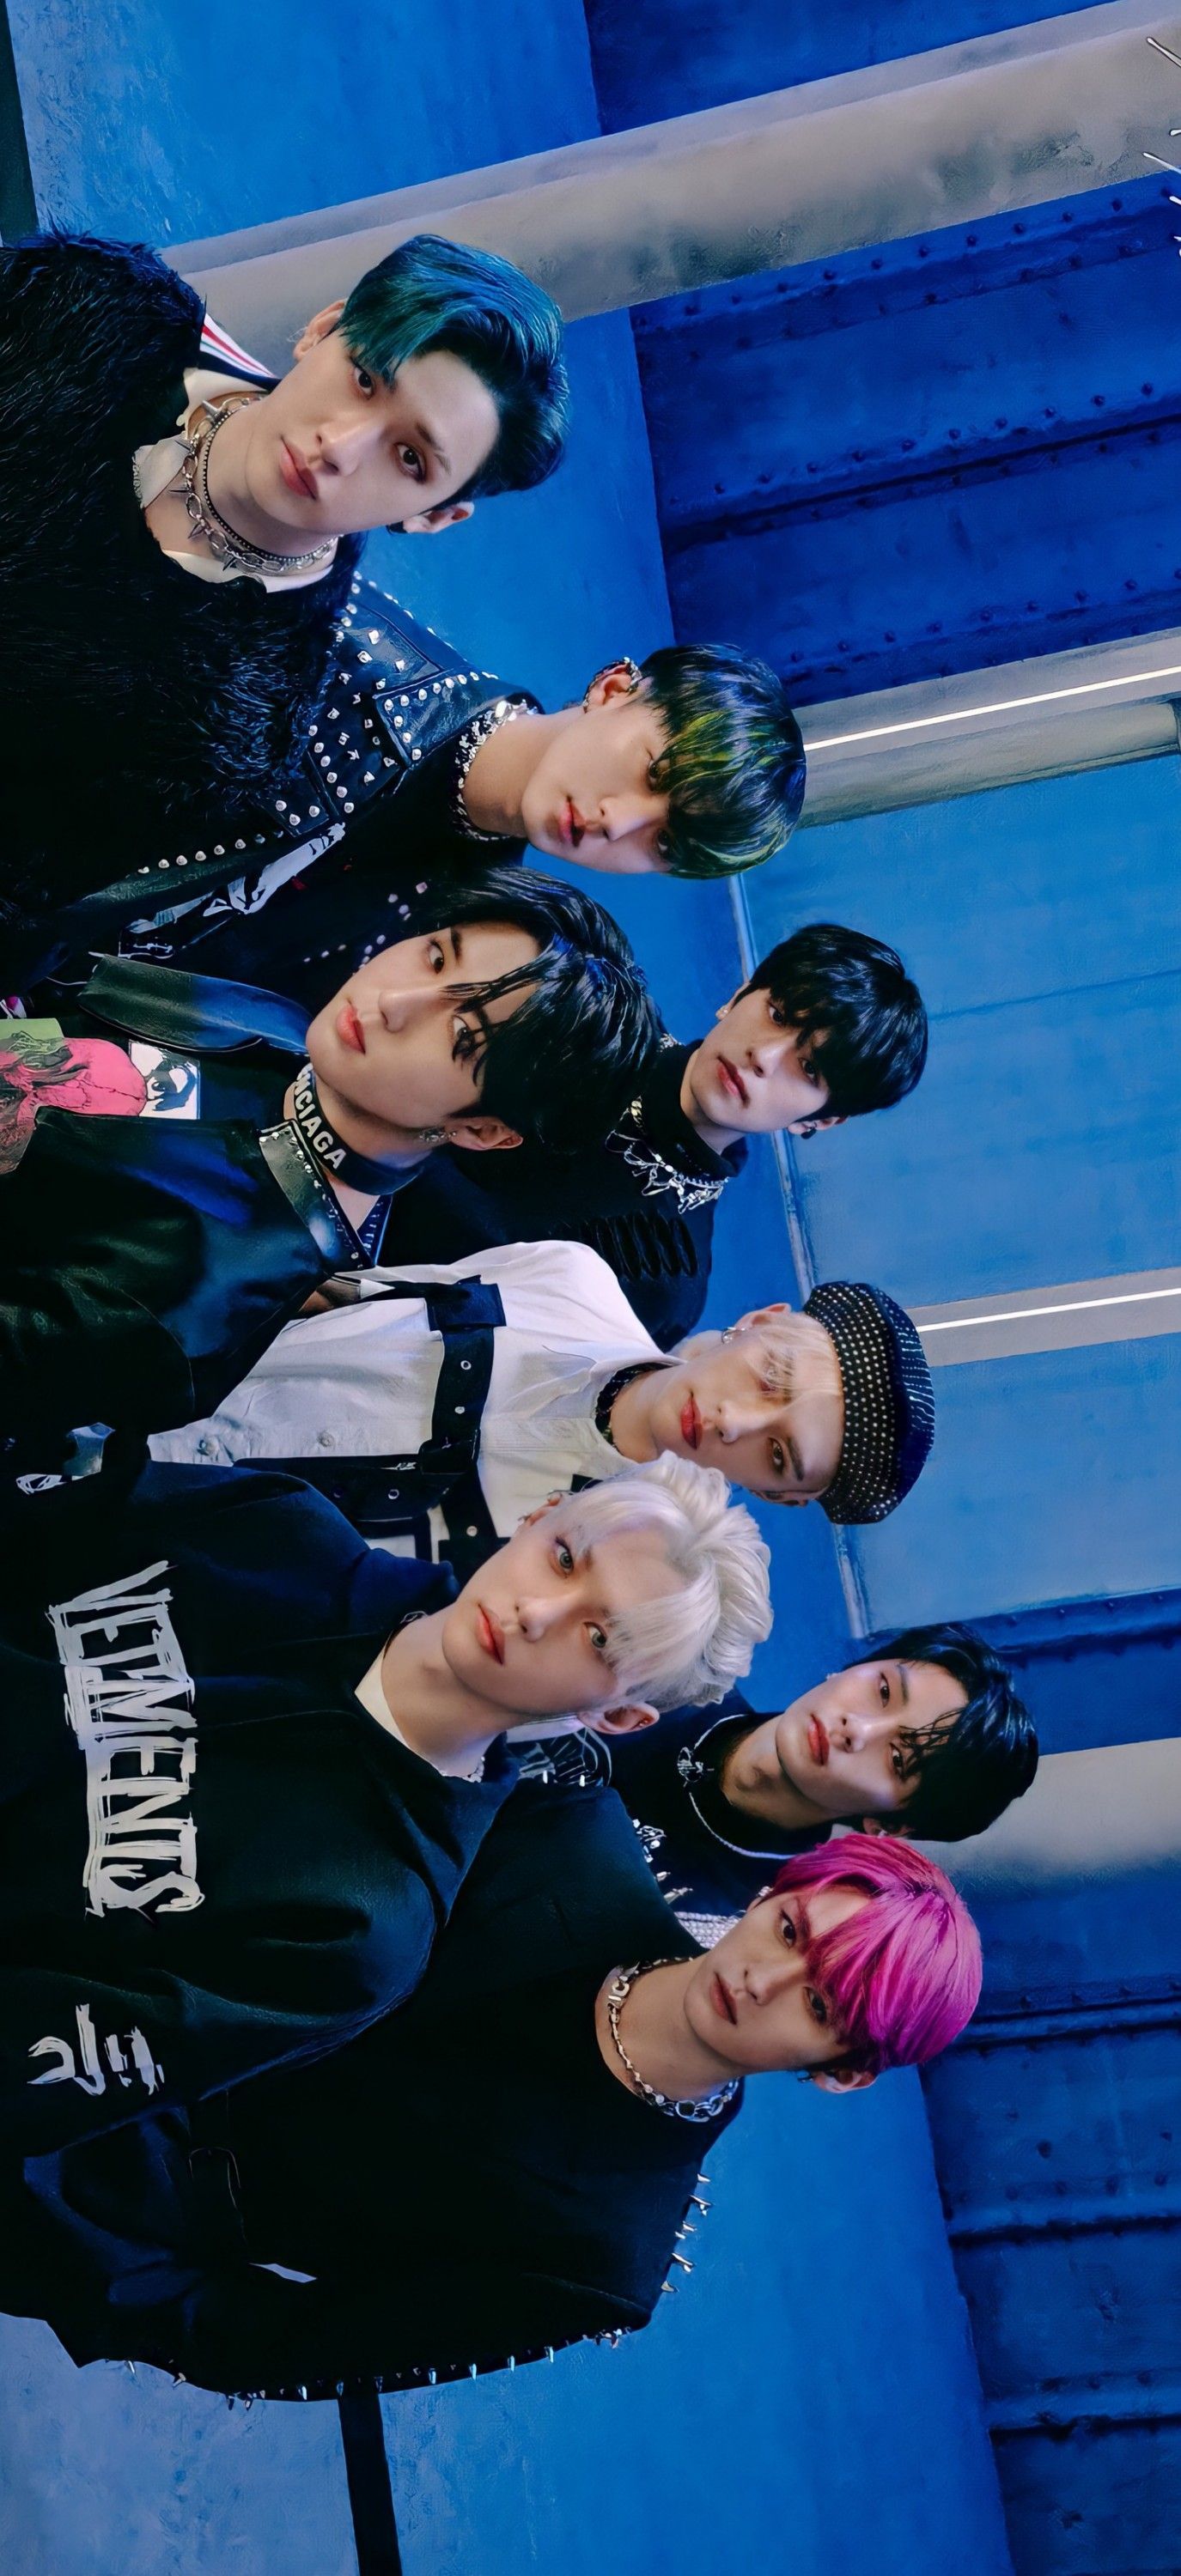 Stray Kids Wallpapers